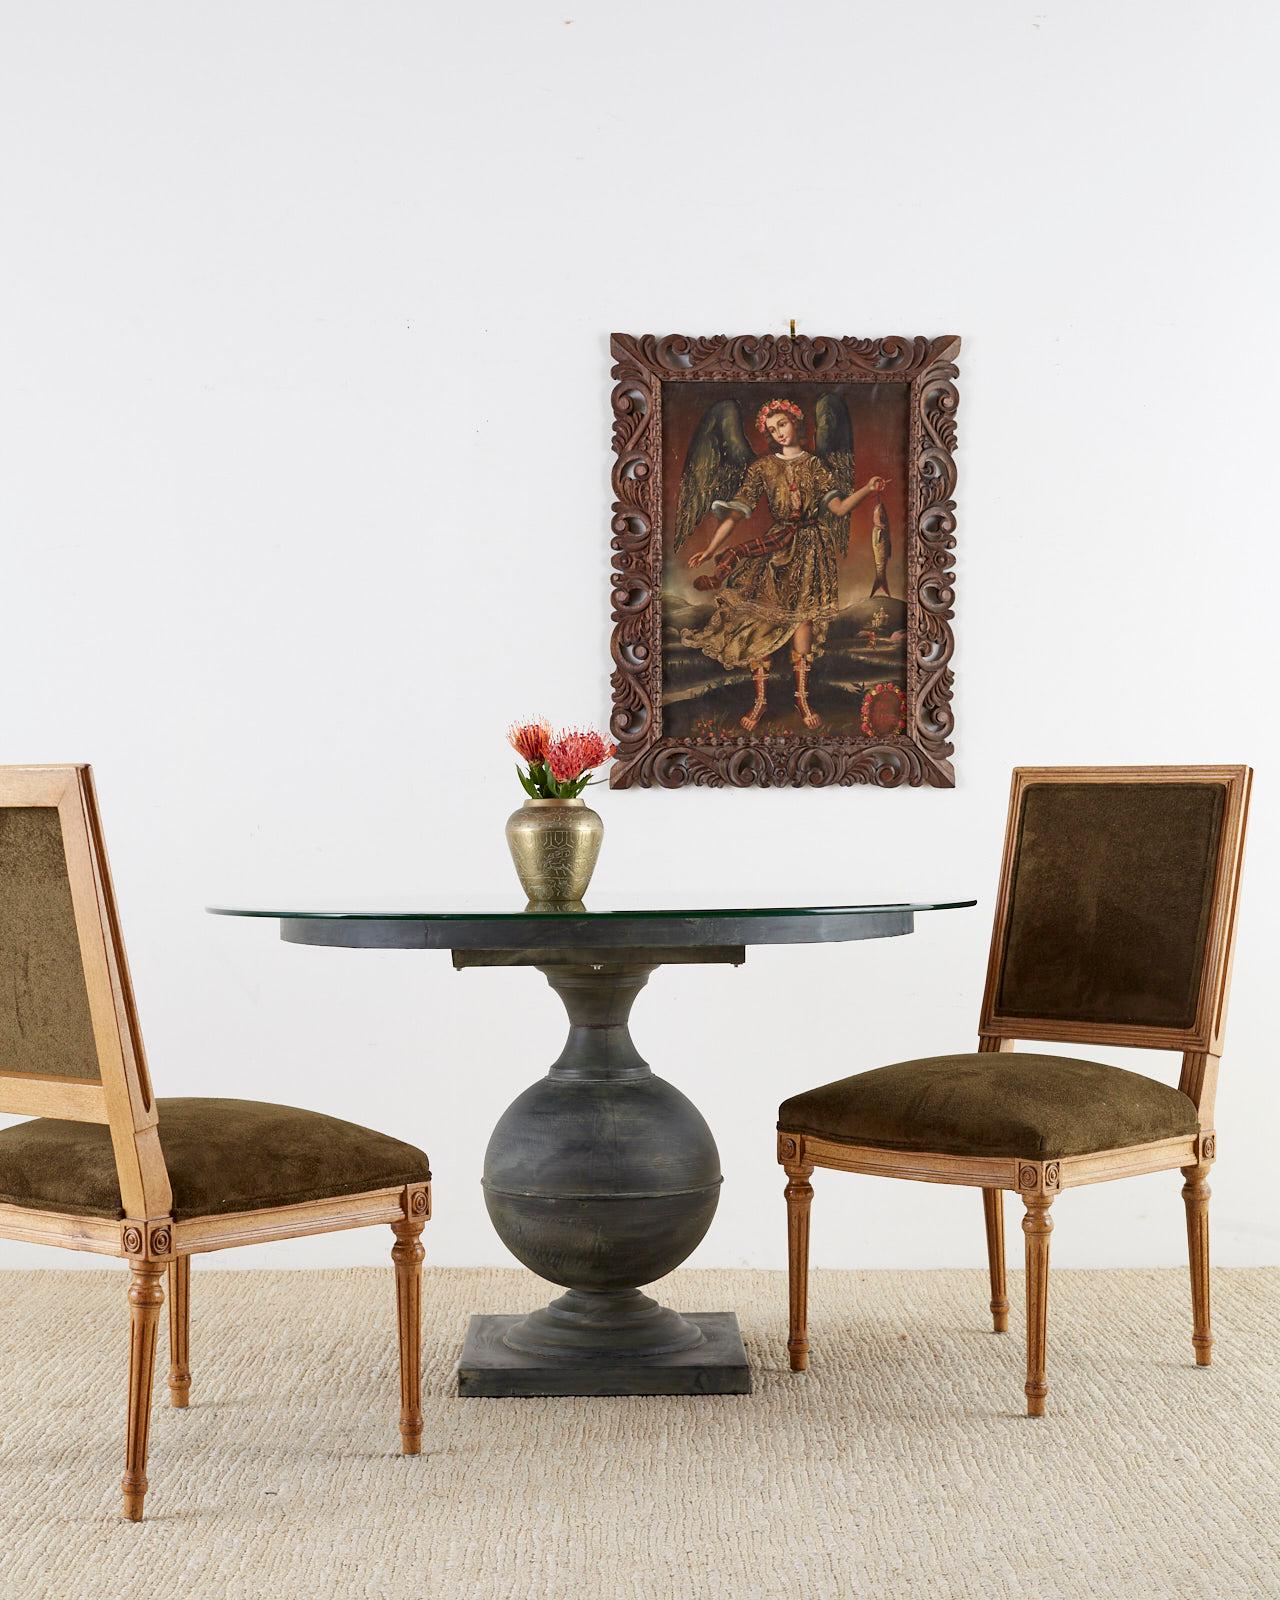 Elegant set of four French Louis XVI style dining chairs featuring new dark green velvet upholstery. The frames have a Classic square back and seat supported by tapered and fluted legs. The corners are decorated with a modern round design instead of